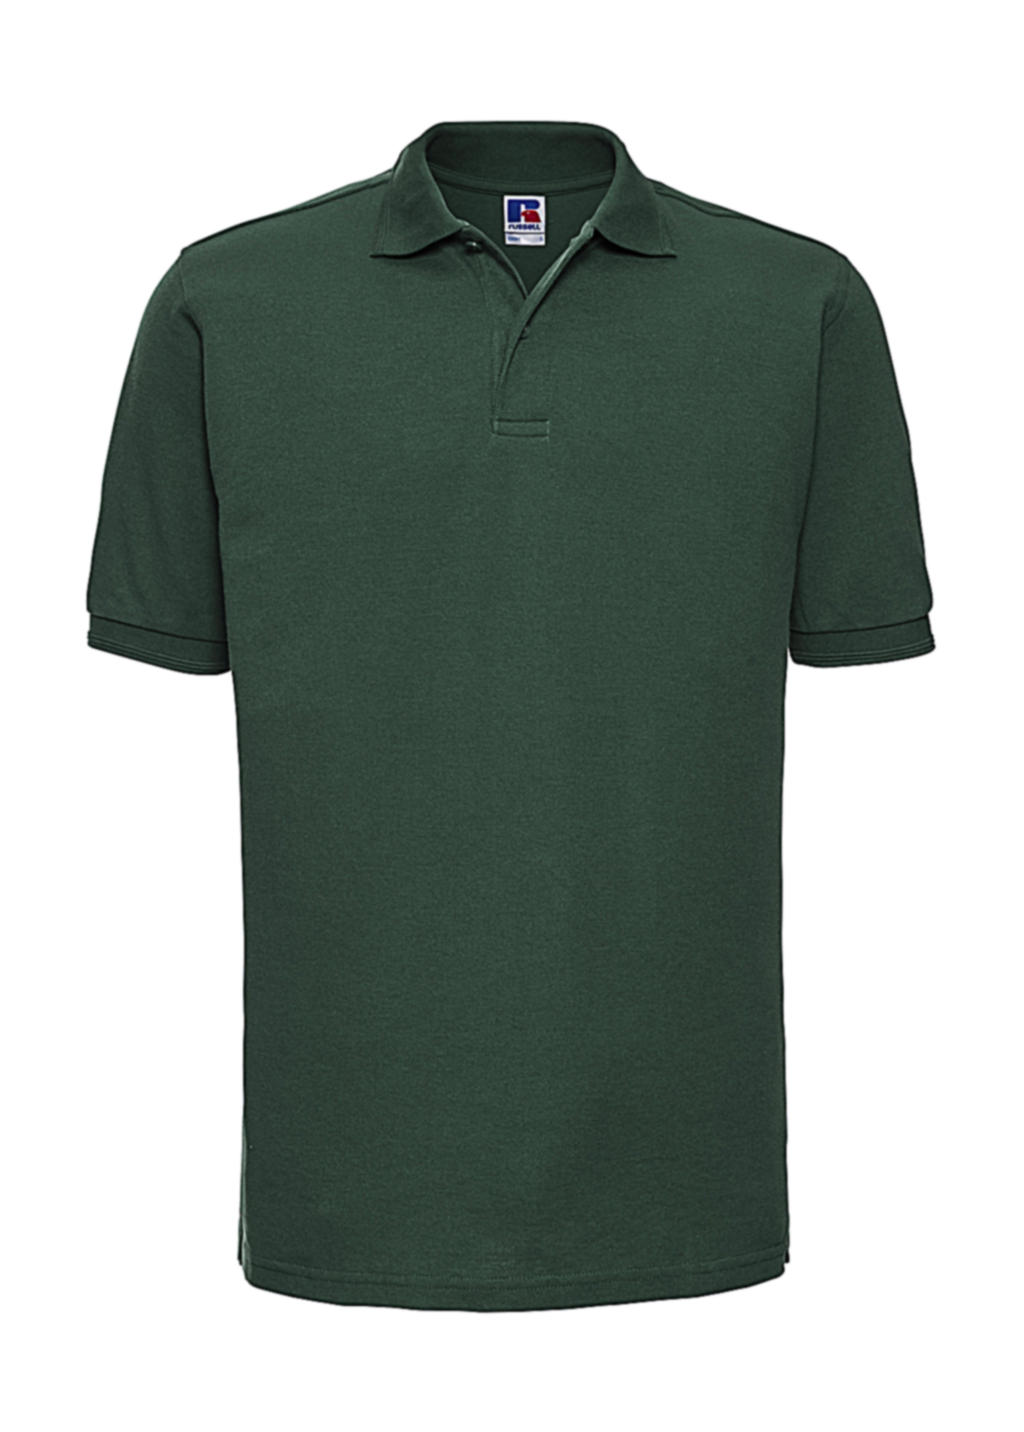  Hardwearing Polo - 5XL and 6XL in Farbe Bottle Green